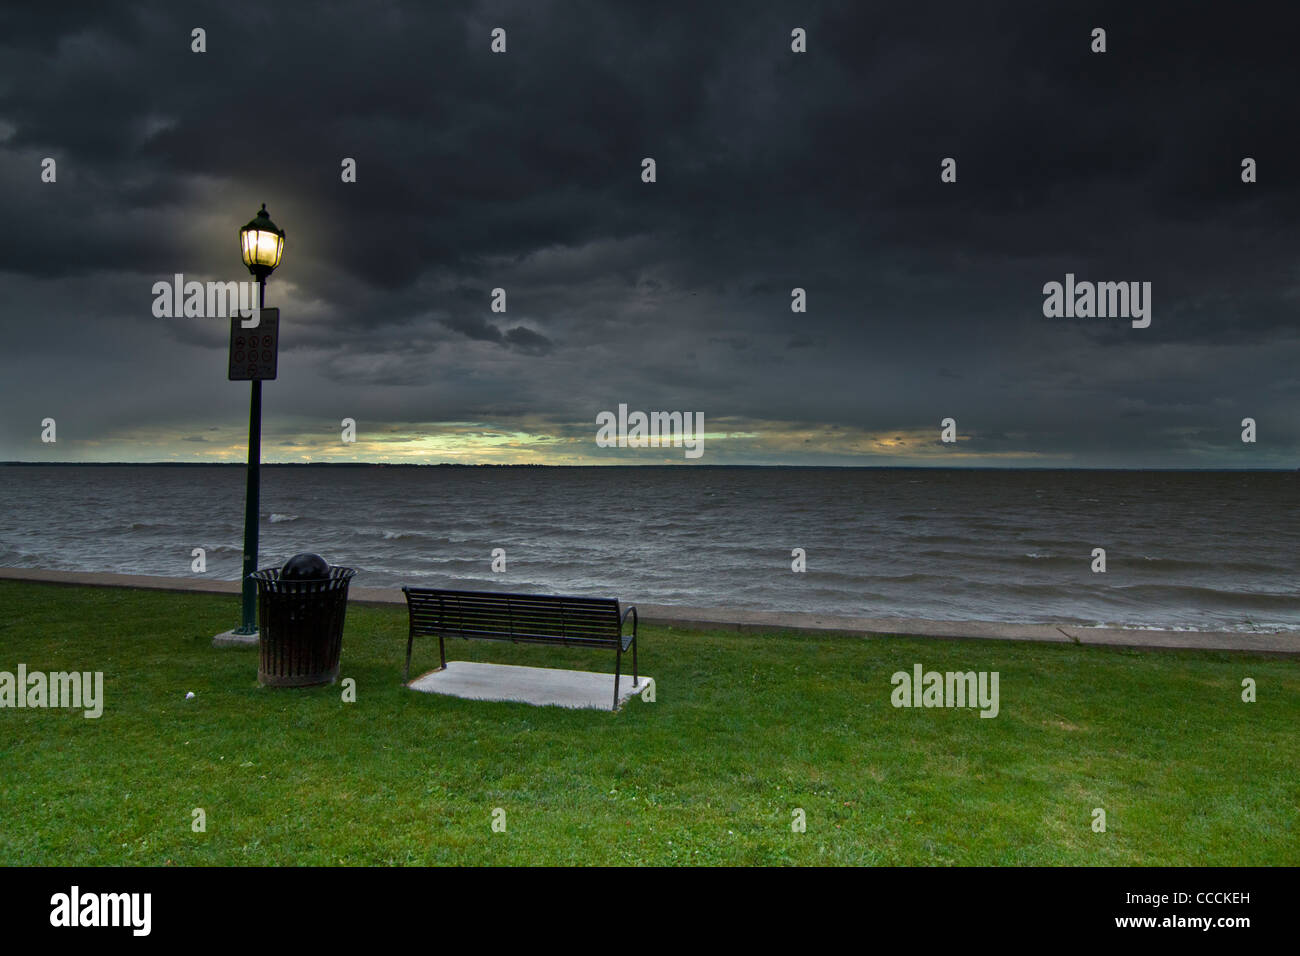 A public lighting lantern pole near a metal bench and a bin, on green grass, near the river side under a heavy stormy sky Stock Photo